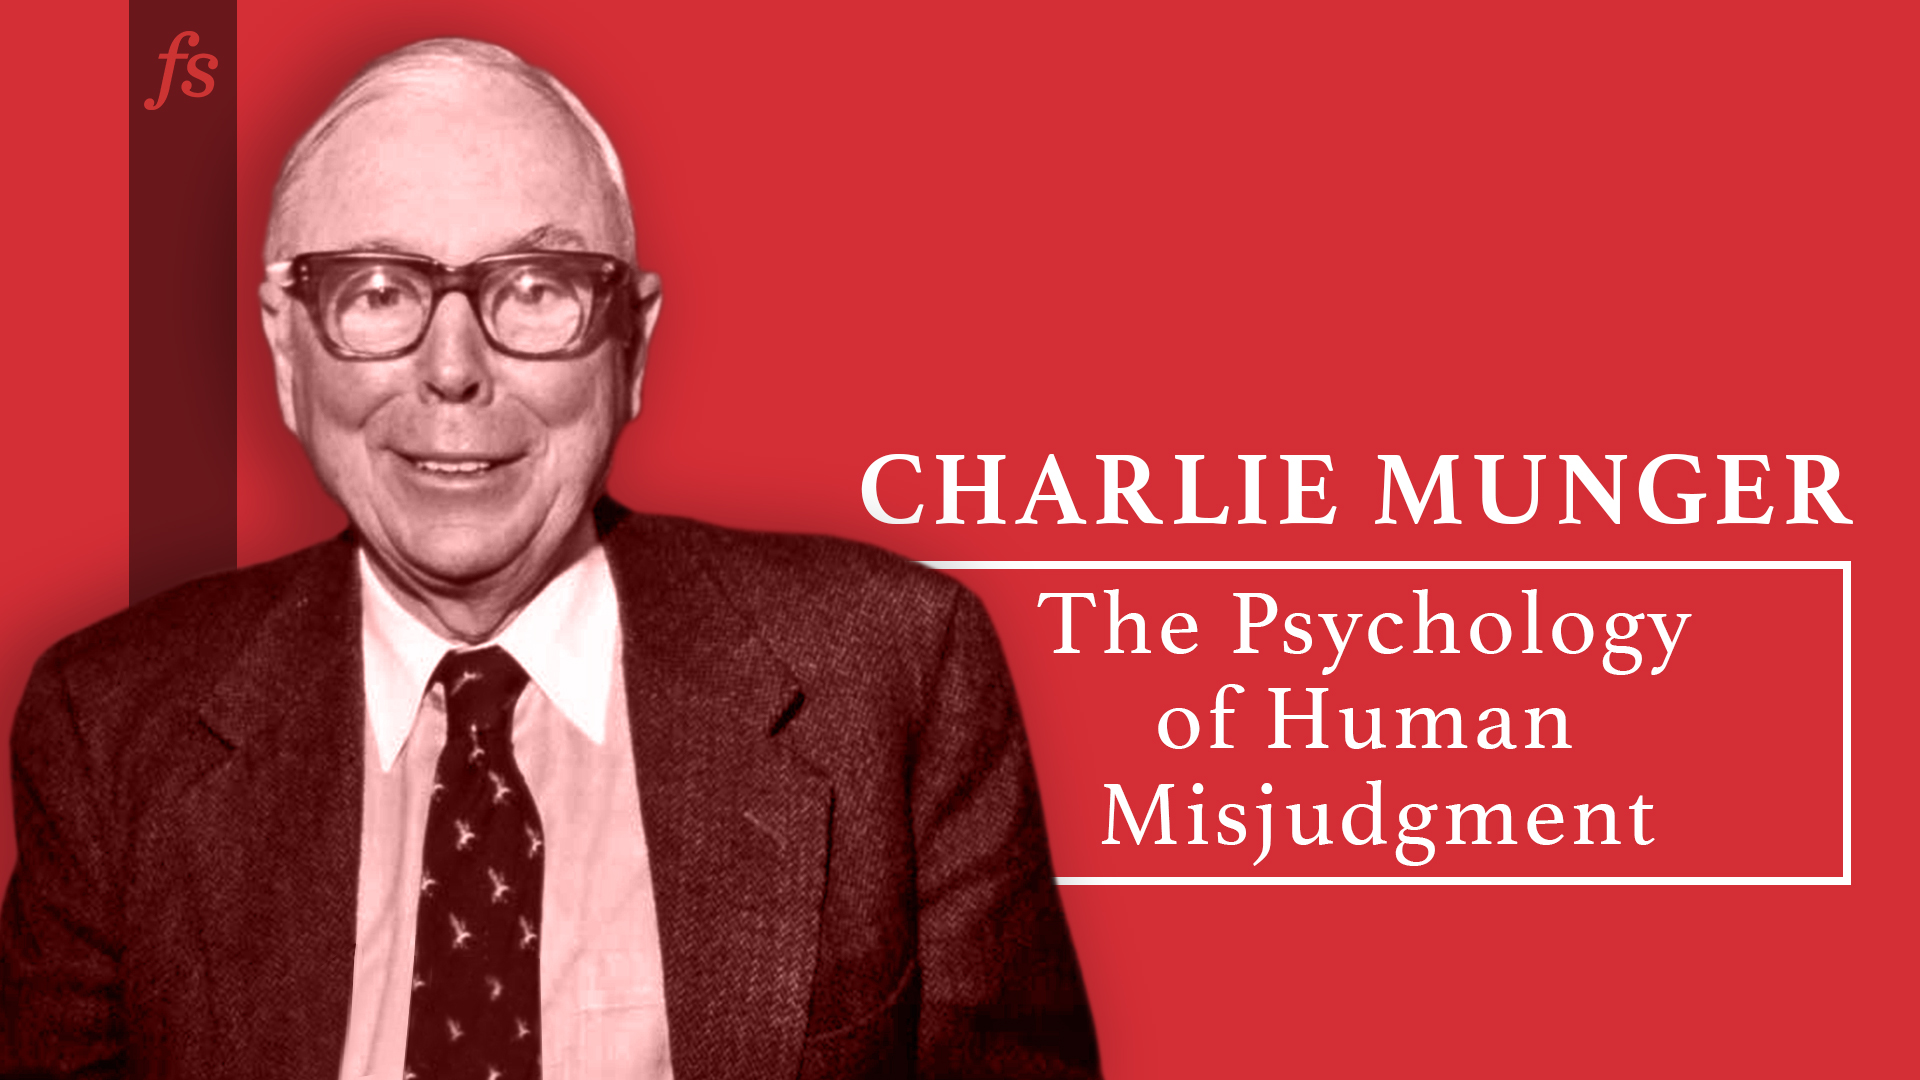 Psychology of Human Misjudgment (Transcript) by Charlie Munger pic